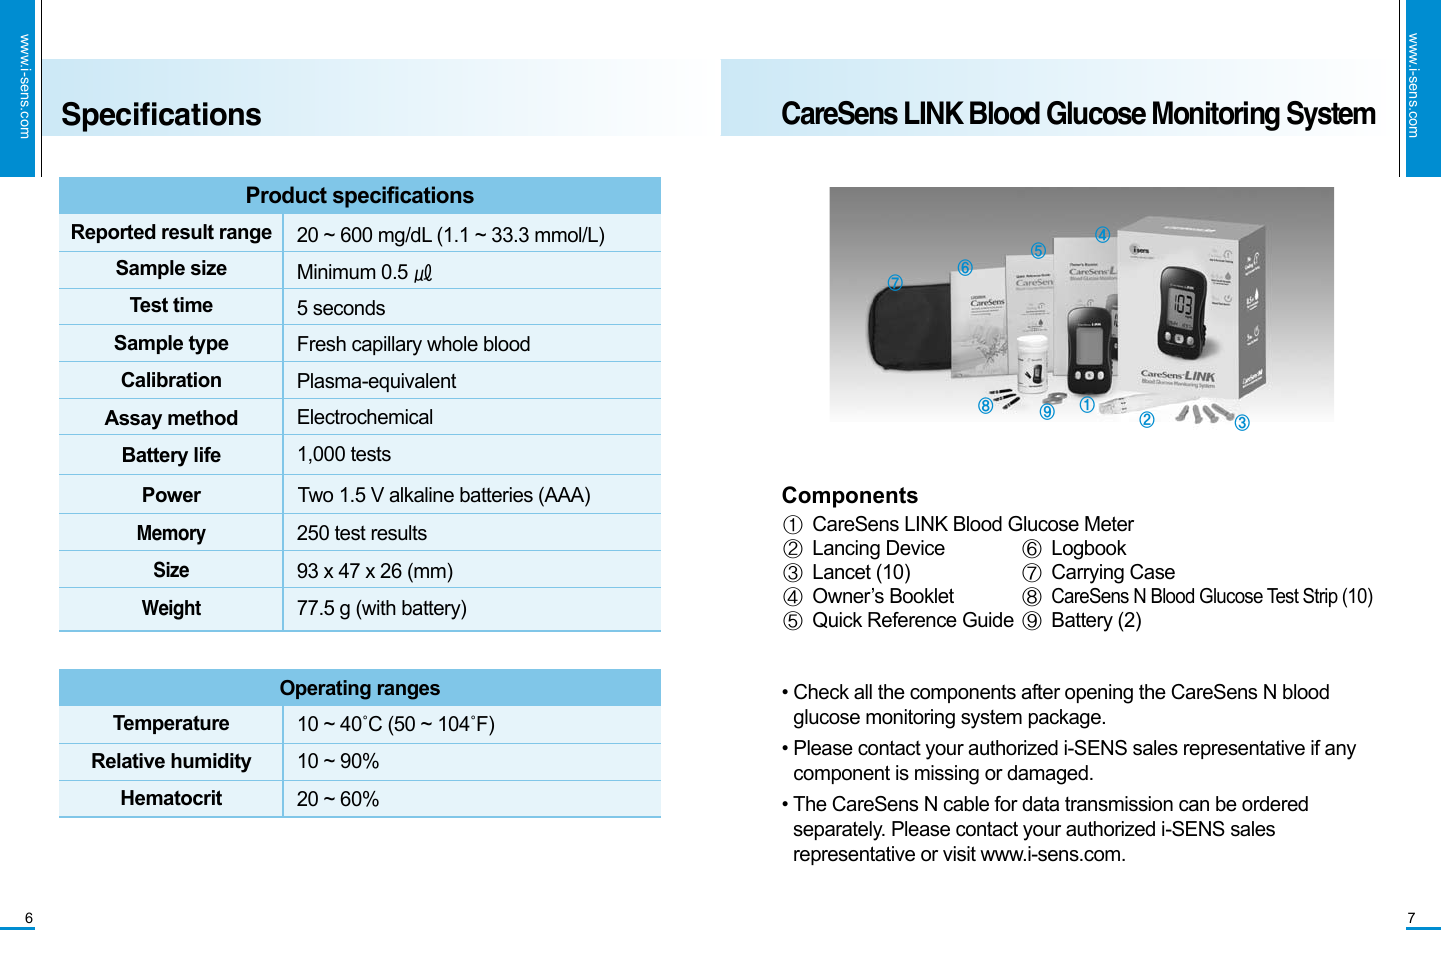 www.i-sens.com7CareSens LINK Blood Glucose Monitoring Systemwww.i-sens.com6SpecificationsProduct specificationsSample sizeTest timeSample typeCalibrationAssay methodBattery lifeMemory SizeWeightPowerReported result range  20 ~ 600 mg/dL (1.1 ~ 33.3 mmol/L)Minimum 0.5 ㎕5 secondsFresh capillary whole bloodPlasma-equivalentElectrochemical1,000 tests250 test results 93 x 47 x 26 (mm)77.5 g (with battery)Two 1.5 V alkaline batteries (AAA) Operating rangesTemperatureRelative humidityHematocrit10 ~ 40˚C (50 ~ 104˚F)10 ~ 90%20 ~ 60%① CareSens LINK Blood Glucose Meter ② Lancing Device③ Lancet (10)④ Owner’s Booklet⑤ Quick Reference Guide⑥ Logbook⑦ Carrying Case⑧ CareSens N Blood Glucose Test Strip (10)⑨ Battery (2)•  Check all the components after opening the CareSens N blood glucose monitoring system package.  •   Please contact your authorized i-SENS sales representative if any component is missing or damaged.•  The CareSens N cable for data transmission can be ordered separately. Please contact your authorized i-SENS sales representative or visit www.i-sens.com.Components①  ②  ③⑥④ ⑤ ⑦⑧⑨